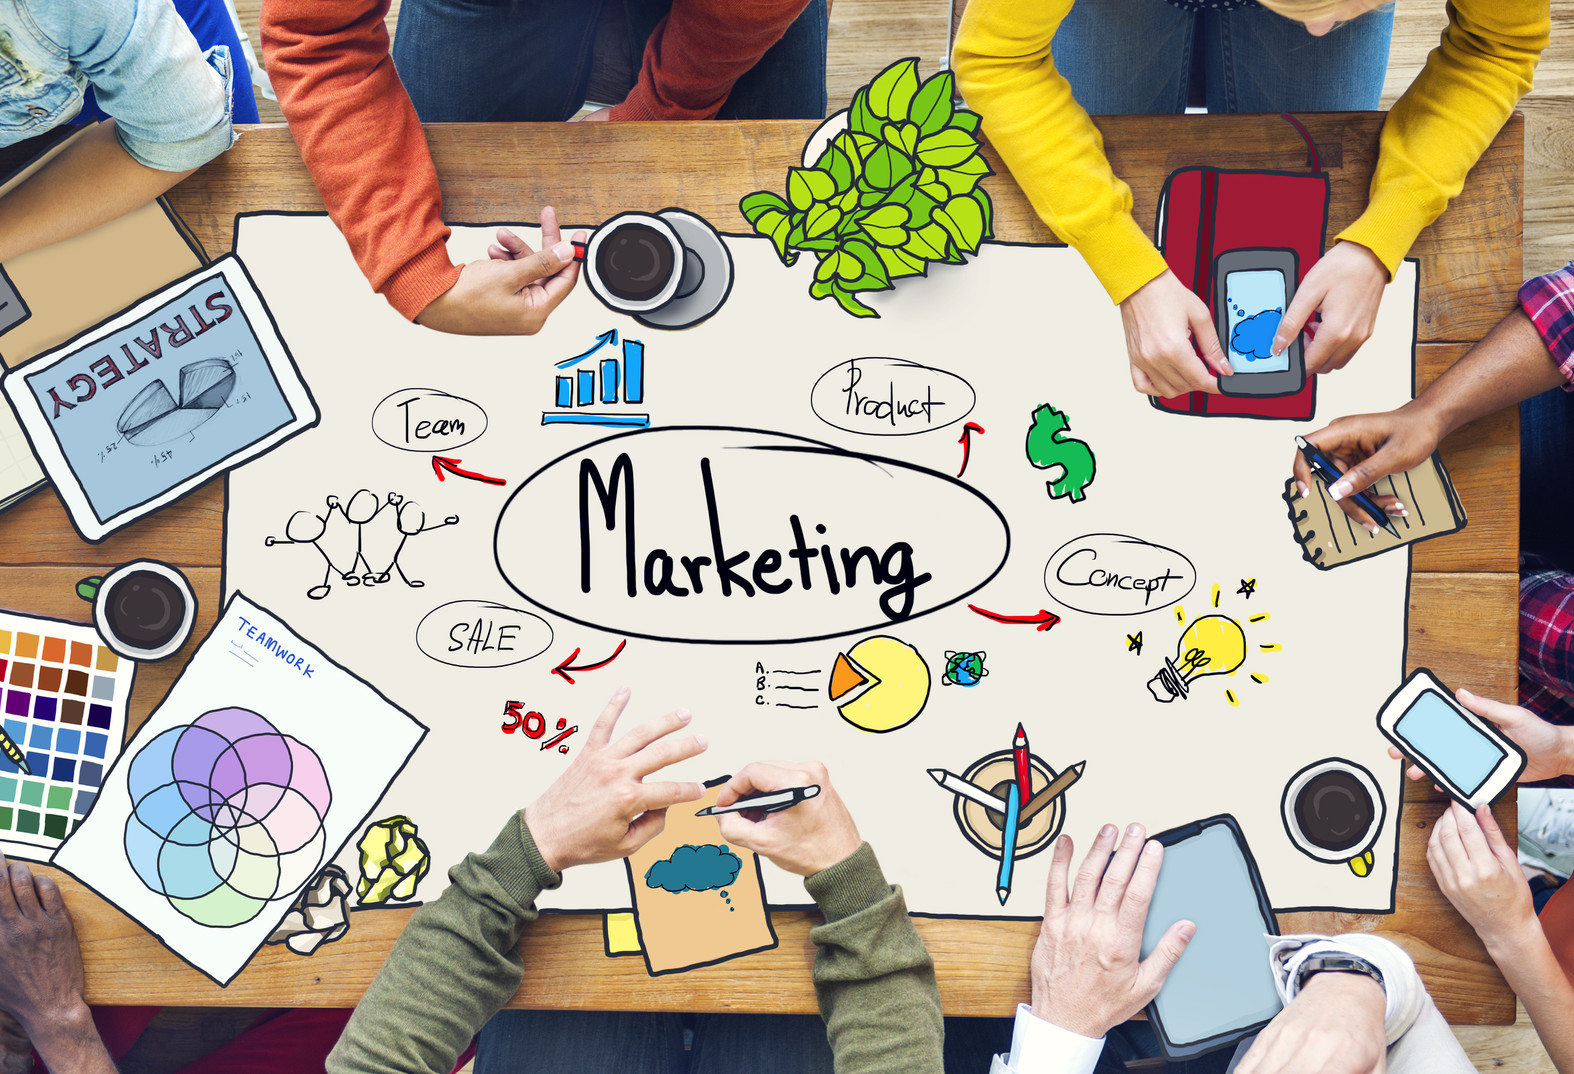 MOOC Summaries - UBC Introduction to Marketing - Diverse People Working and Marketing Concept